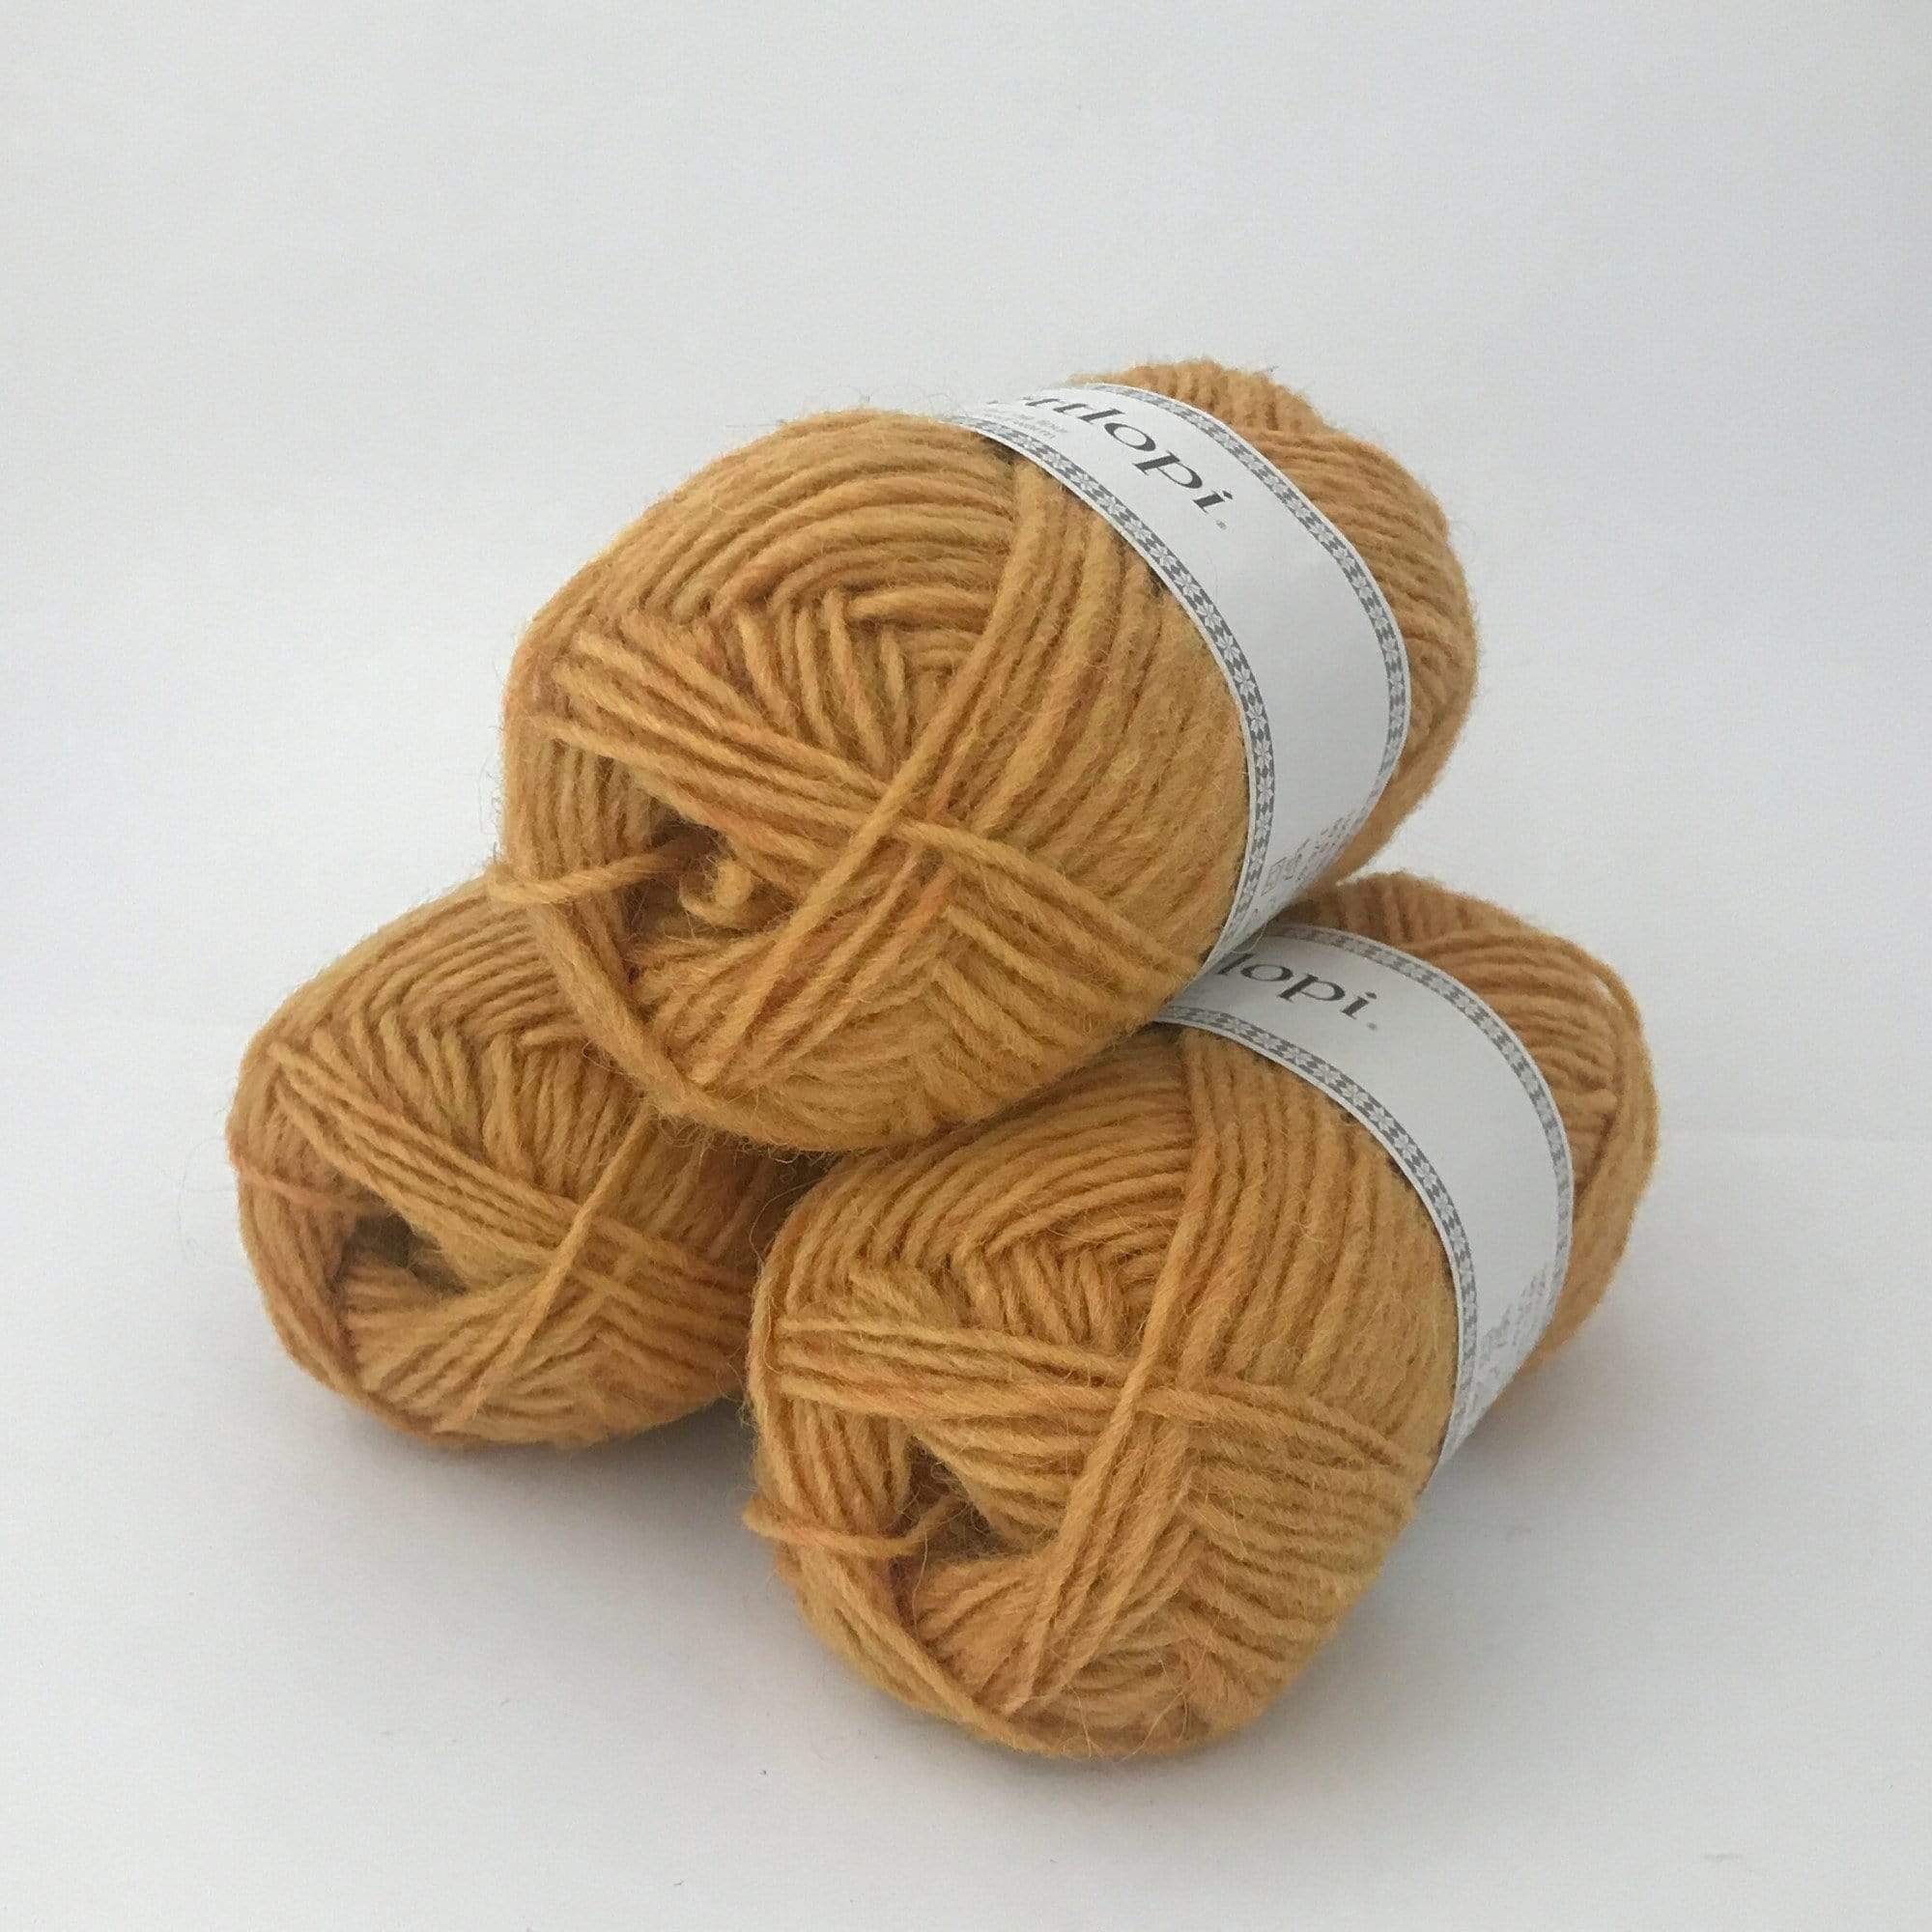 Ball of Lettlopi in colorway 1703 - mimosa.